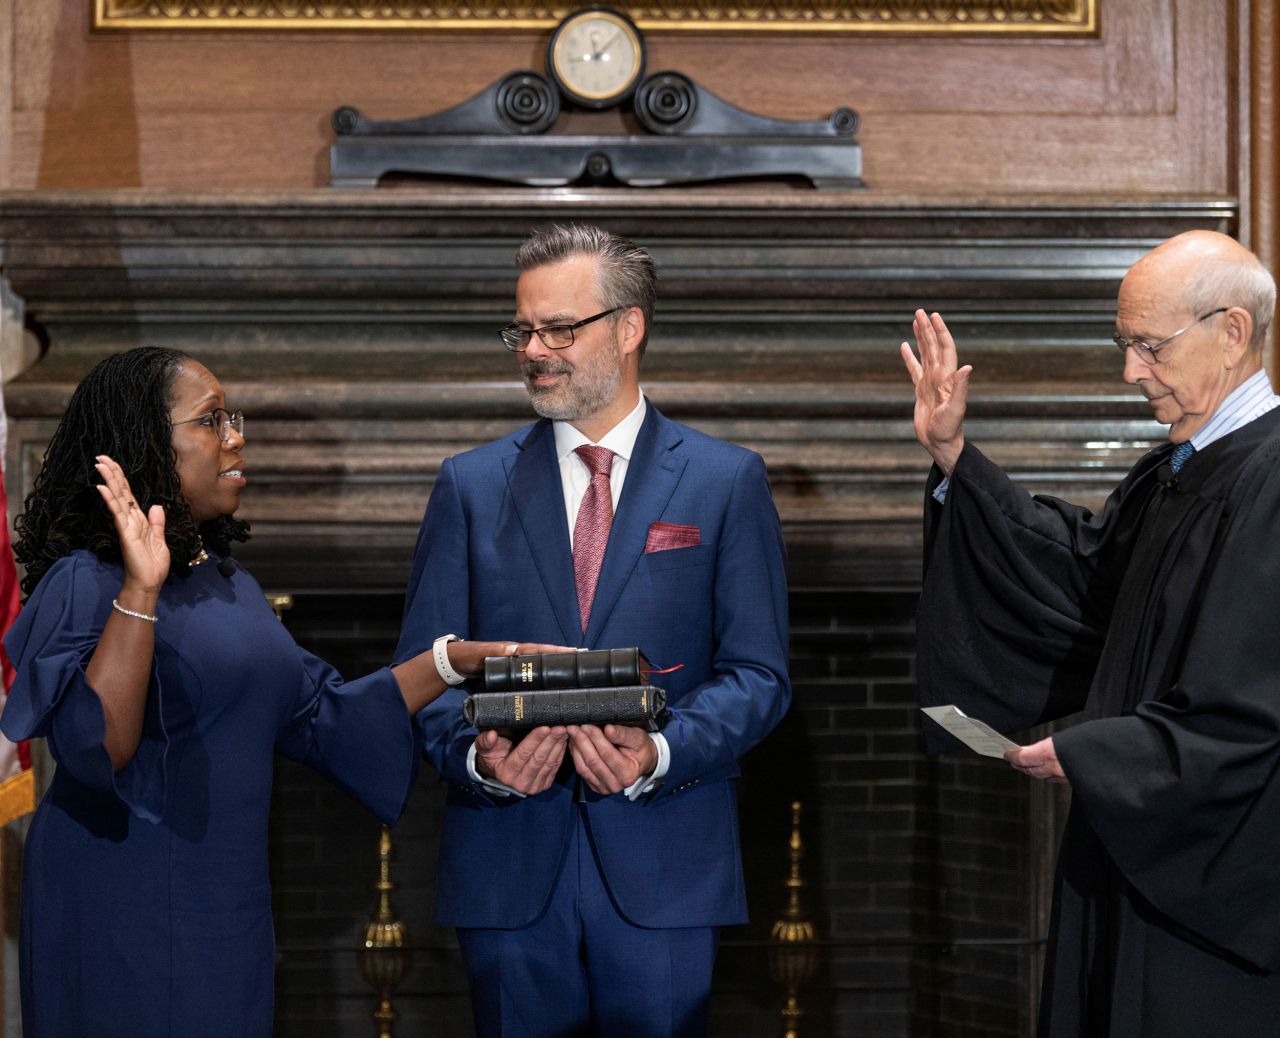 Retiring Supreme Court Justice Stephen Breyer administers the Judicial Oath to his replacement, <a href="http://www.cnn.com/2022/02/25/politics/gallery/ketanji-brown-jackson/index.html" target="_blank">Ketanji Brown Jackson,</a> as her husband, Patrick, holds the Bible on Thursday, June 30. She is <a href="https://www.cnn.com/2022/06/30/politics/who-is-justice-ketanji-brown-jackson/index.html" target="_blank">the first Black woman to serve on the Supreme Court.</a>